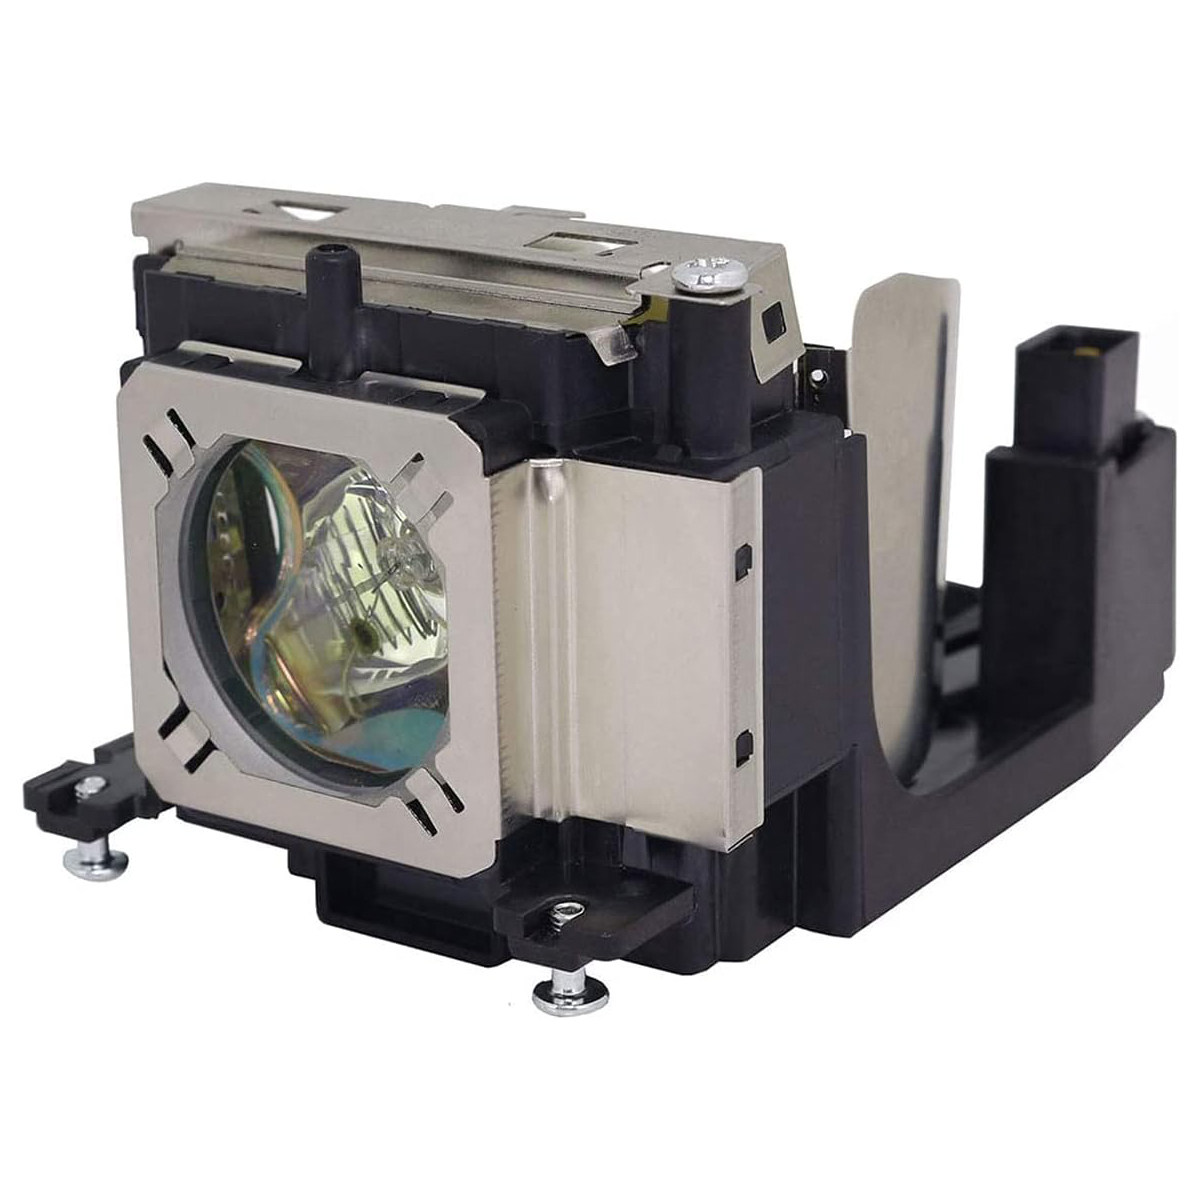 Replacement Projector lamp LV-LP35/5323B001AA For CANON LV-7290/LV-7292M /LV-7292S